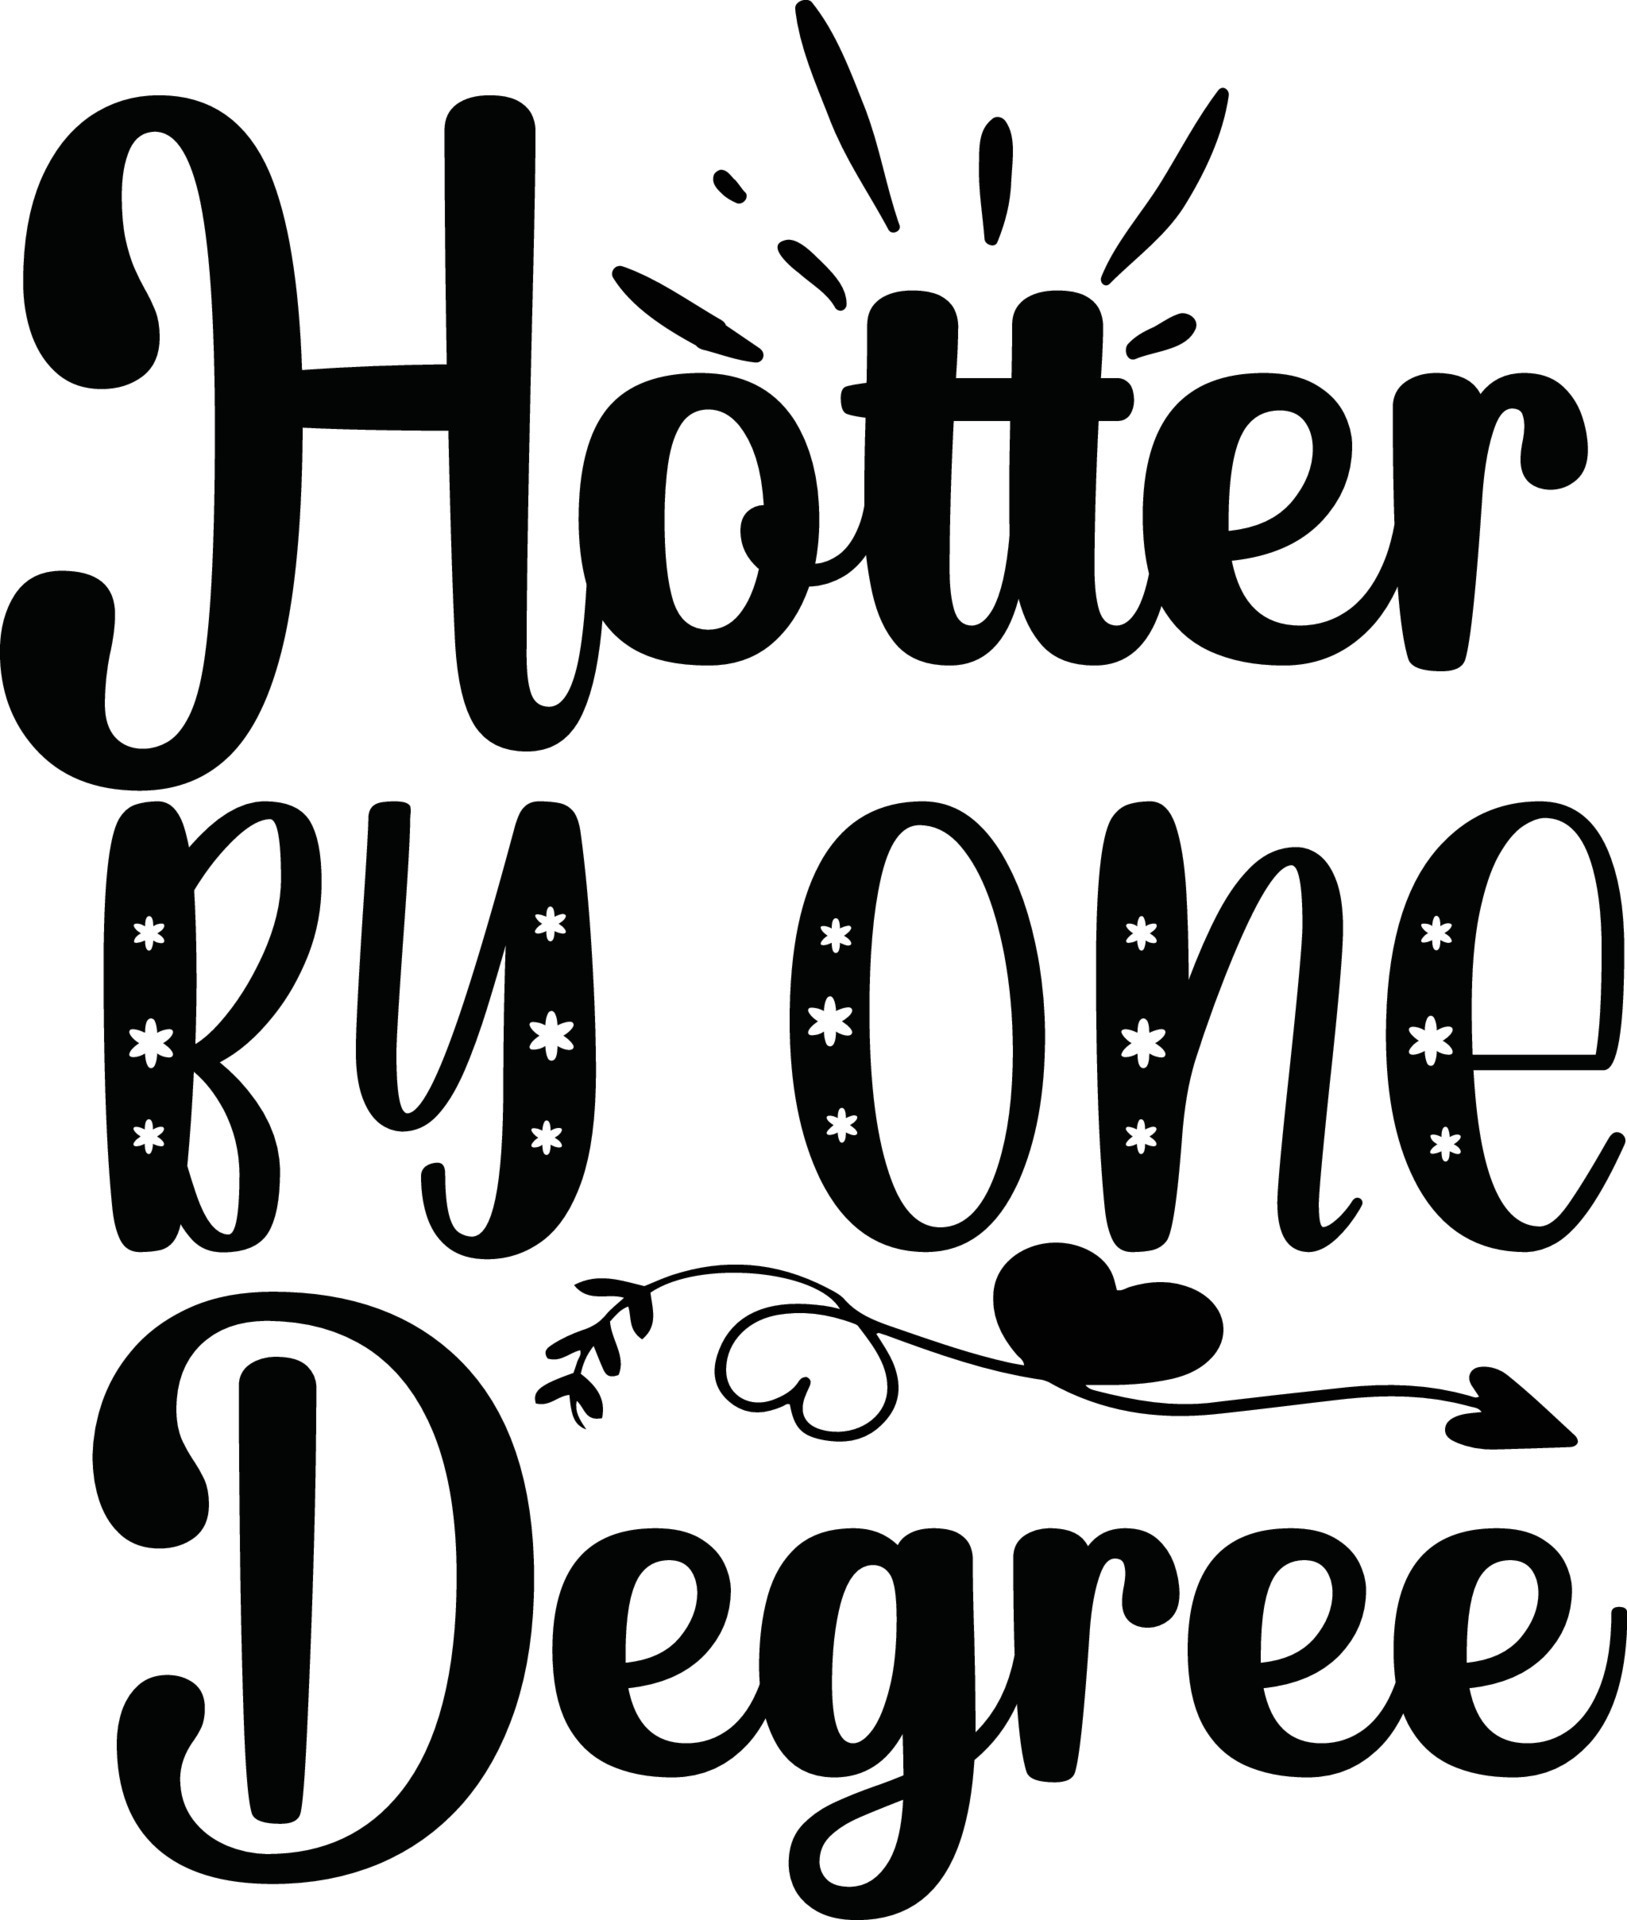 Hotter By One Degree 15389308 Vector Art at Vecteezy